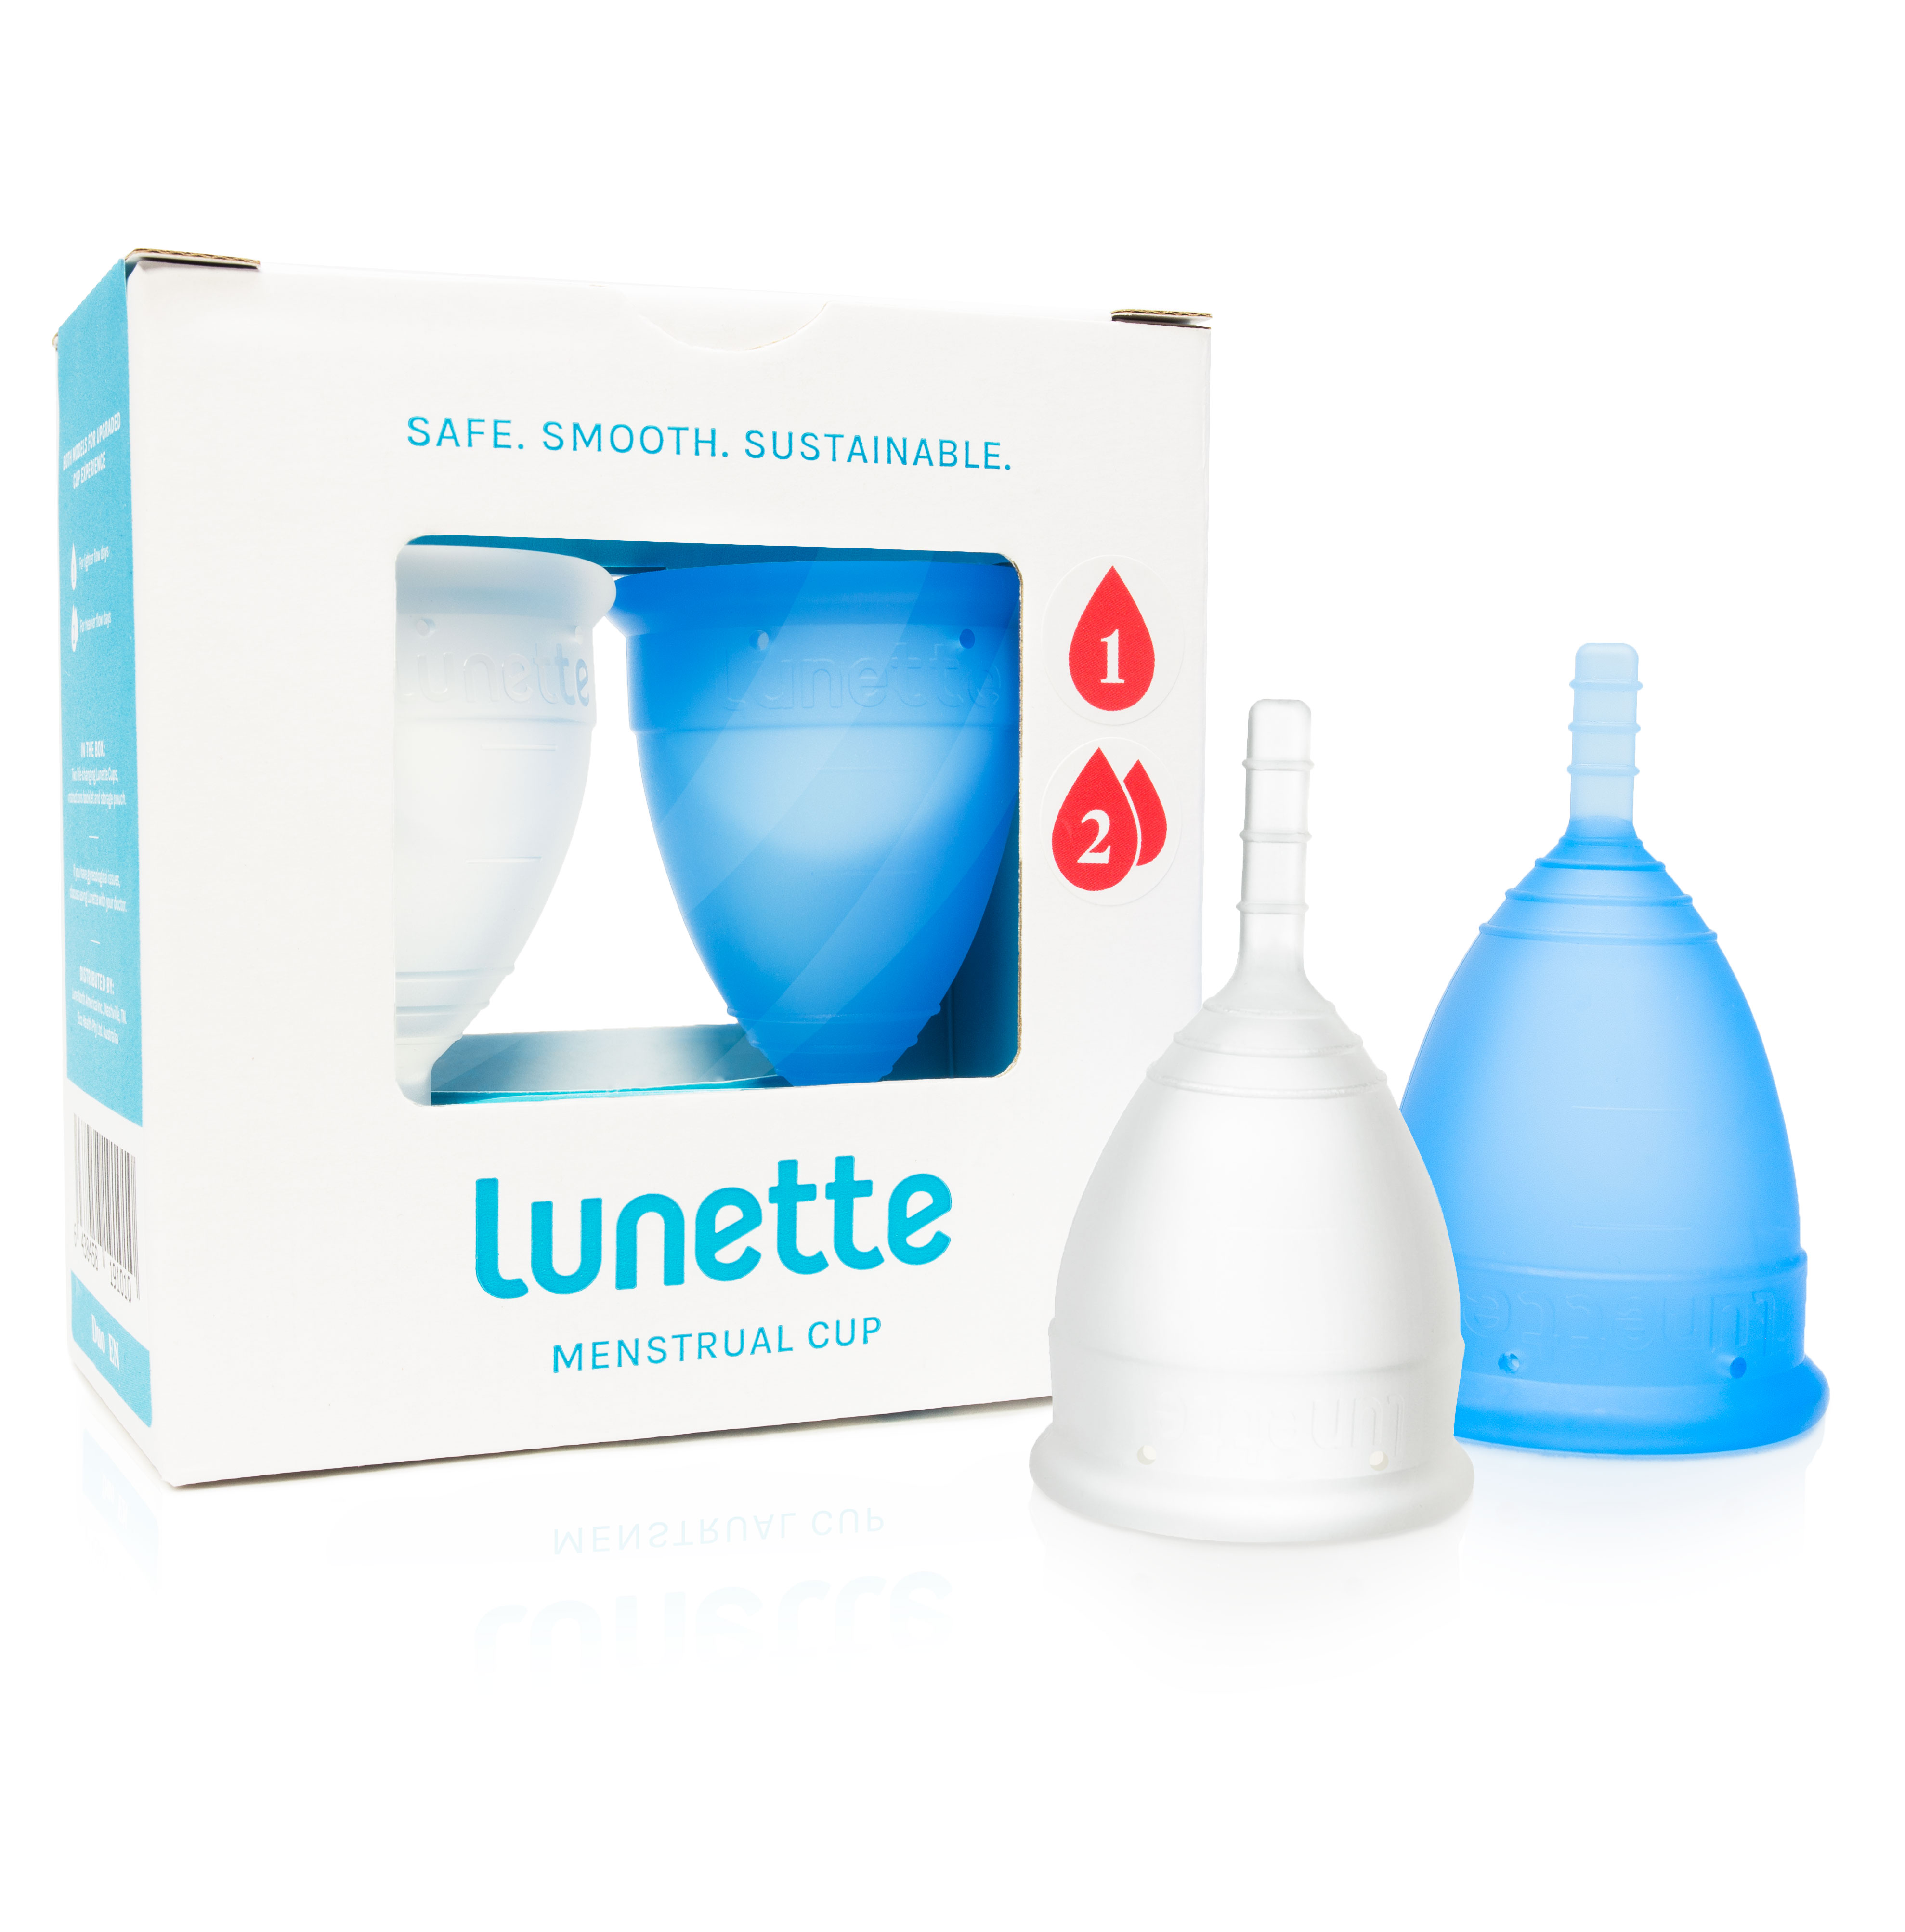 Lunette menstrual cup duo pack.